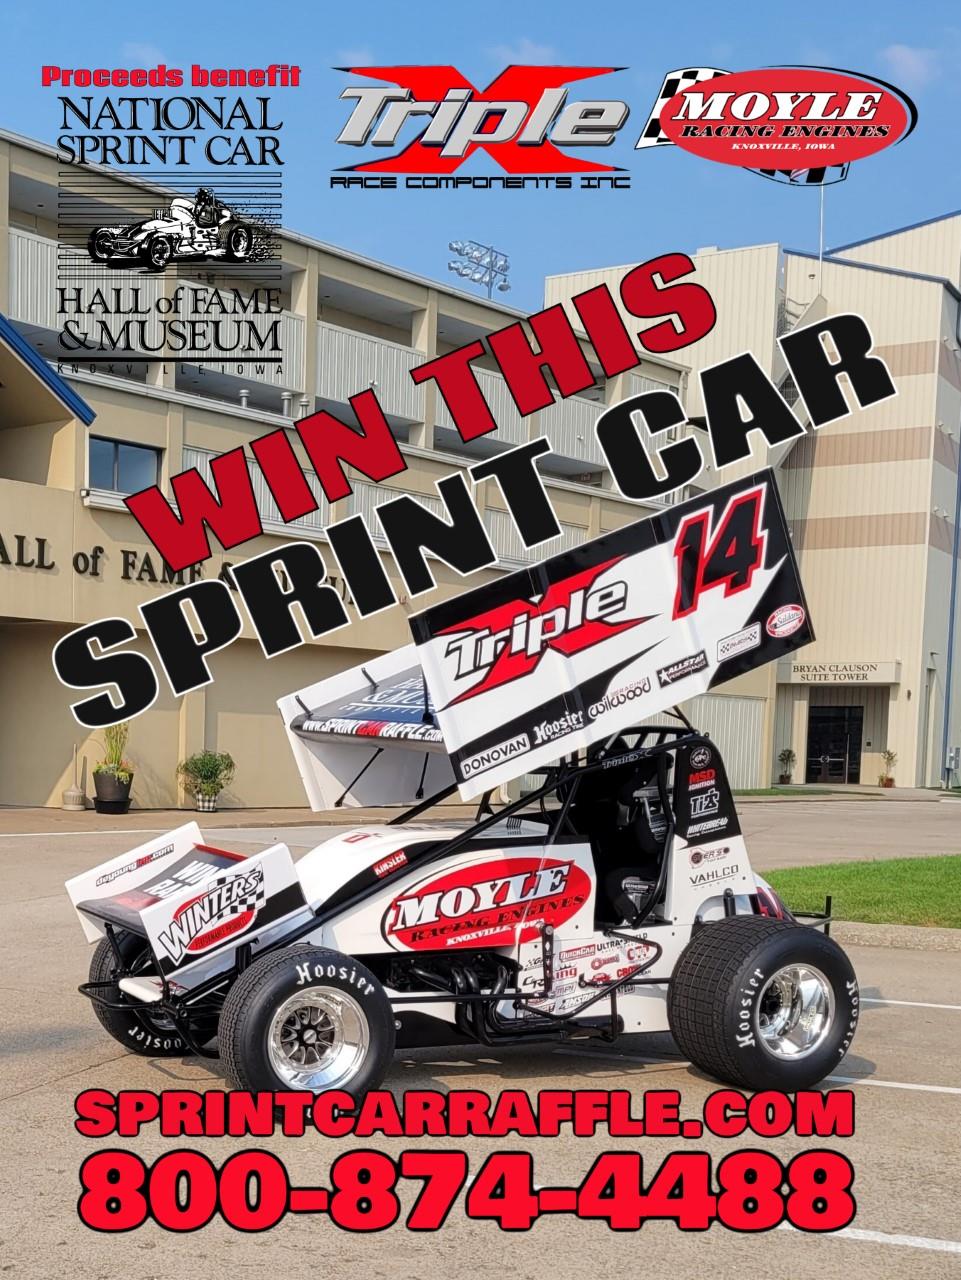 National Sprint Car Hall of Fame & Museum Raffle Car/Auction Set for Williams Grove National Open!